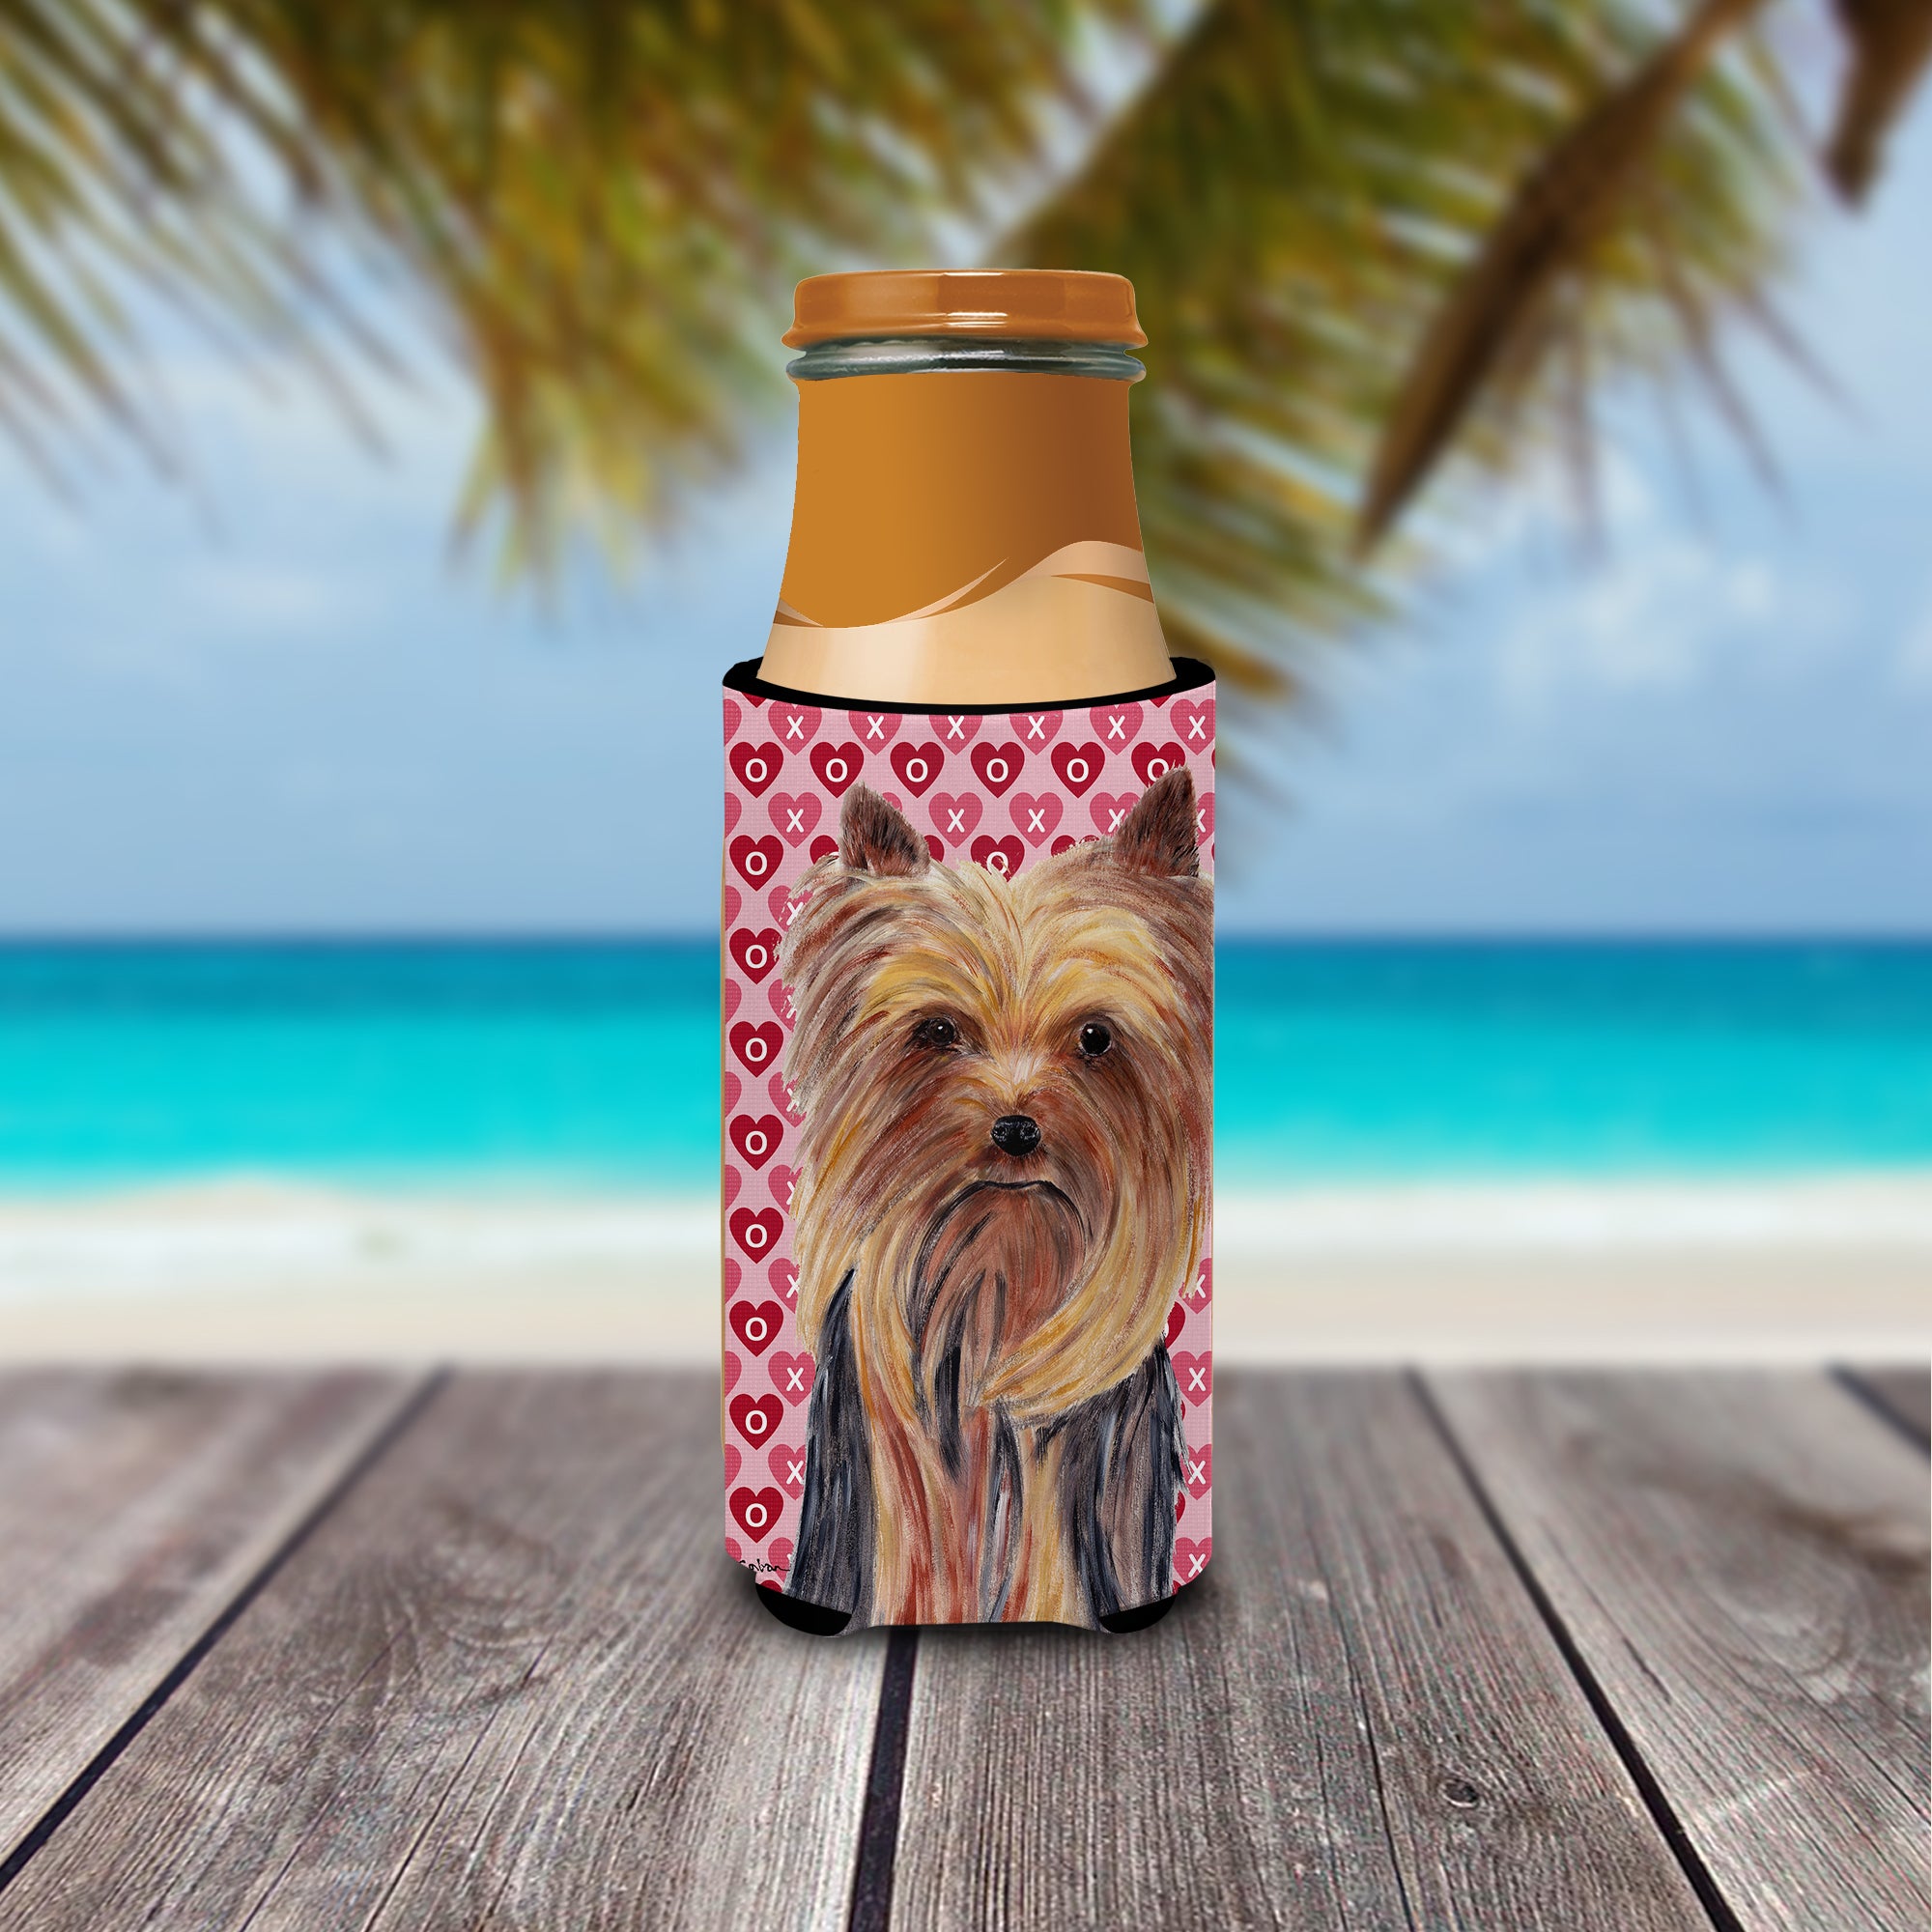 Yorkie Hearts Love and Valentine's Day Portrait Ultra Beverage Insulators for slim cans SC9274MUK